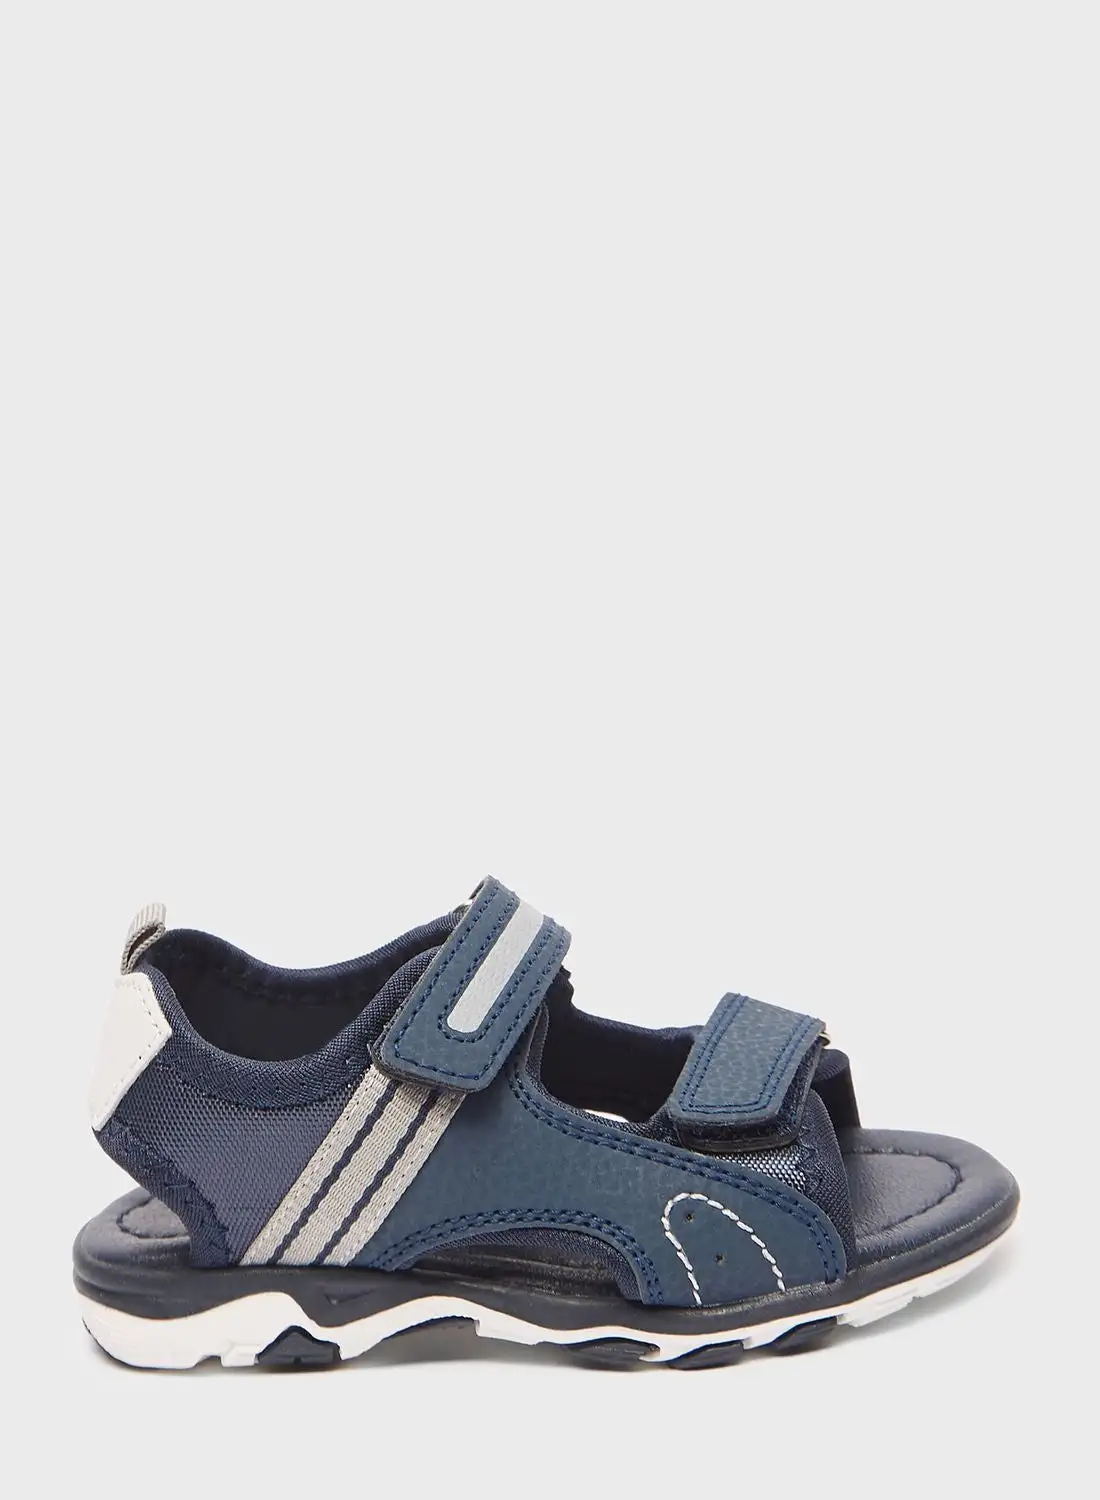 LBL by Shoexpress Kids Casual Sandals